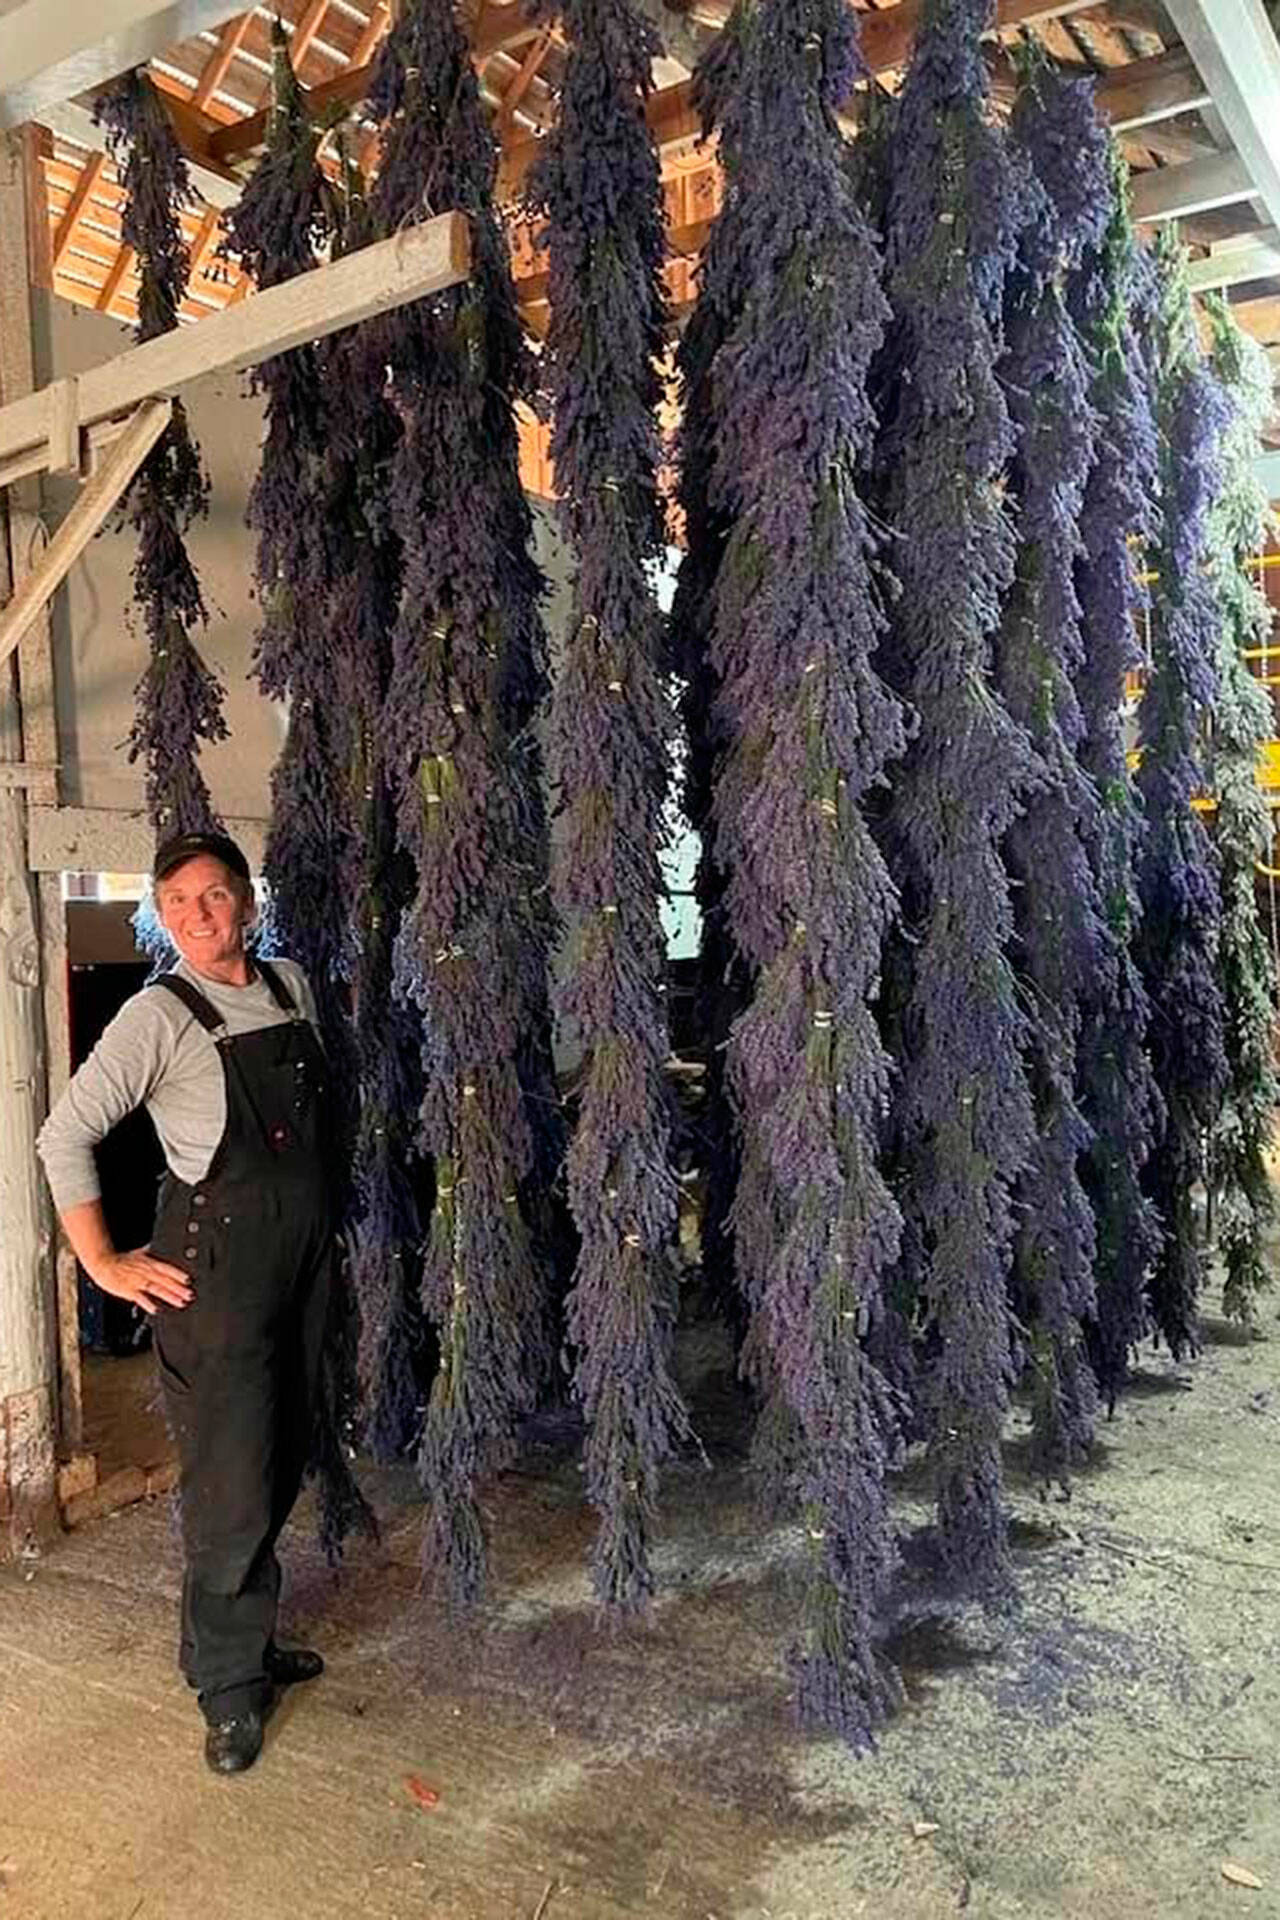 Photo courtesy Old Barn Lavender Company
Melissa Herbelin stands by drying lavender on the Old Barn Lavender Company property. Cast and crew members from Olympic Theatre Arts helped build the drying racks last summer.